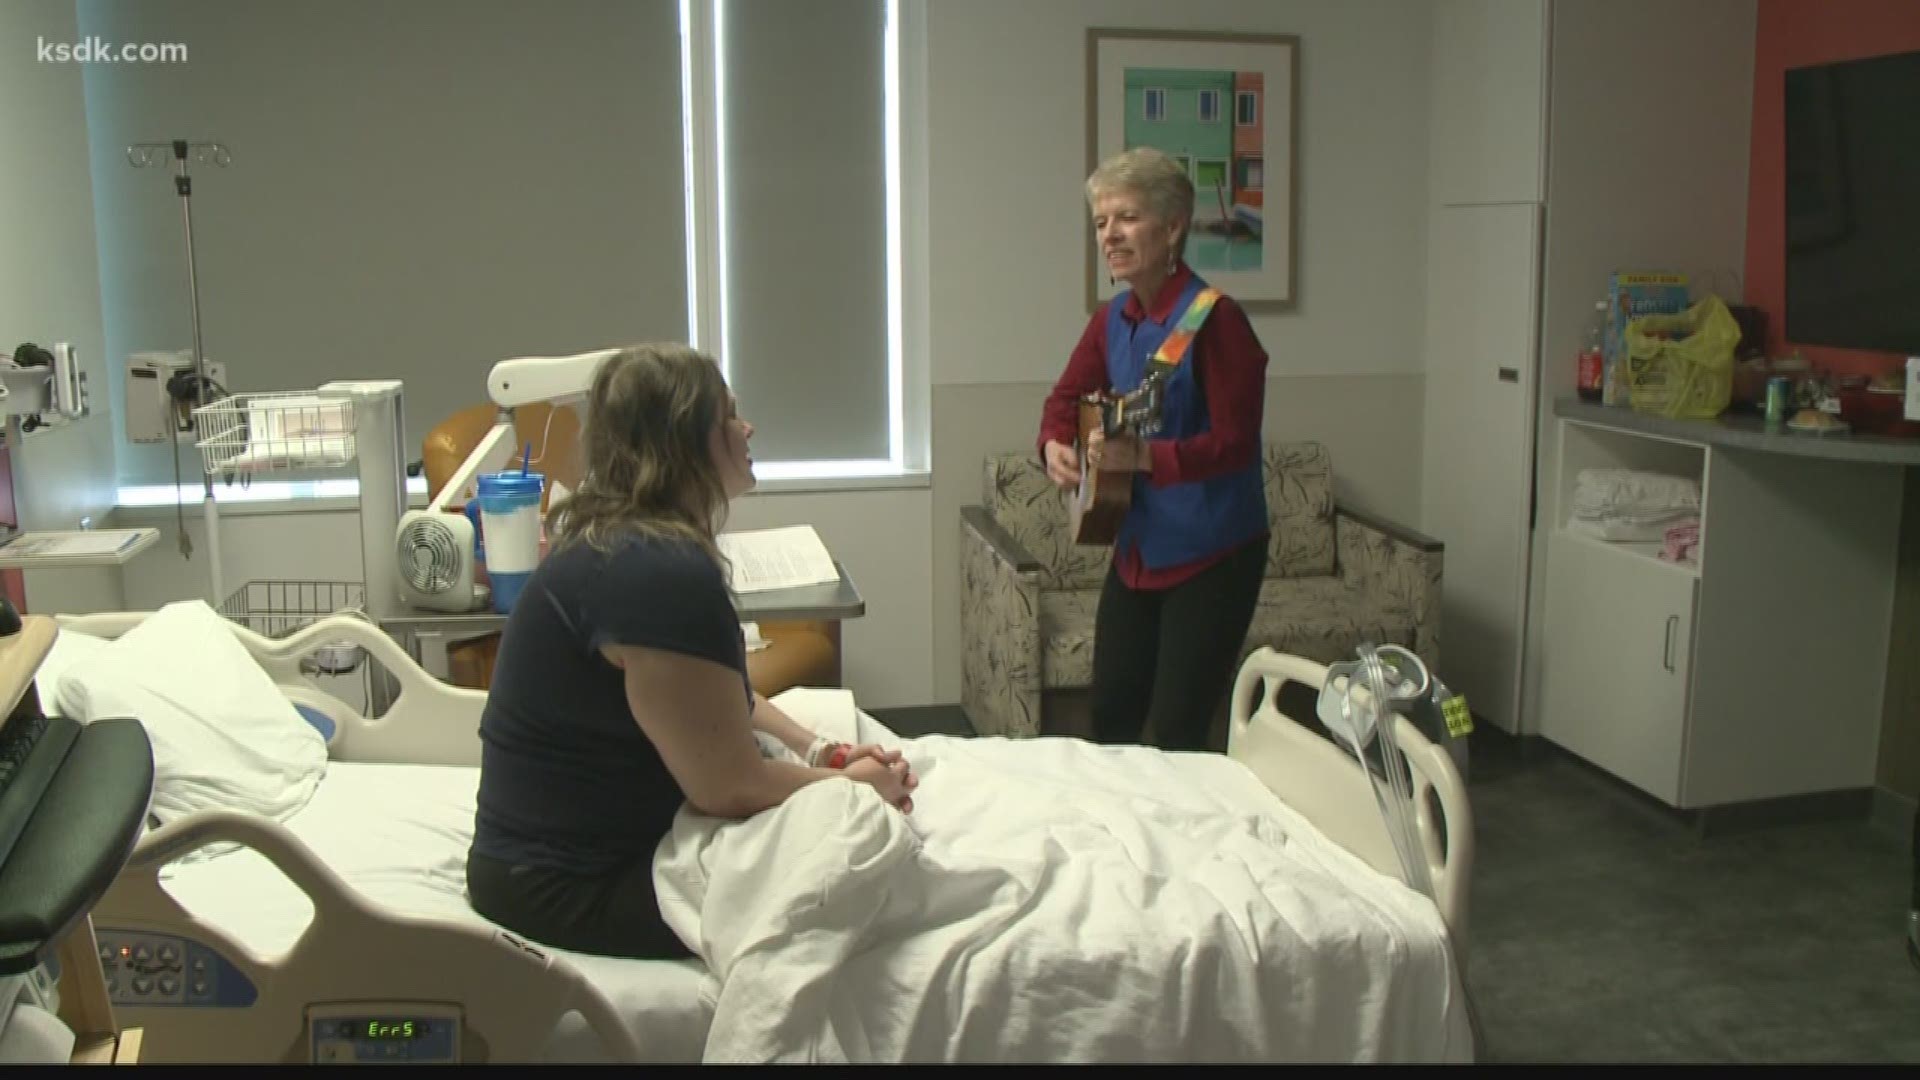 The last place anyone wants to be for Christmas is in the hospital. But as Mike Bush explains in this week's "Making a Difference" report, what a local volunteer is doing for patients is music to their ears.